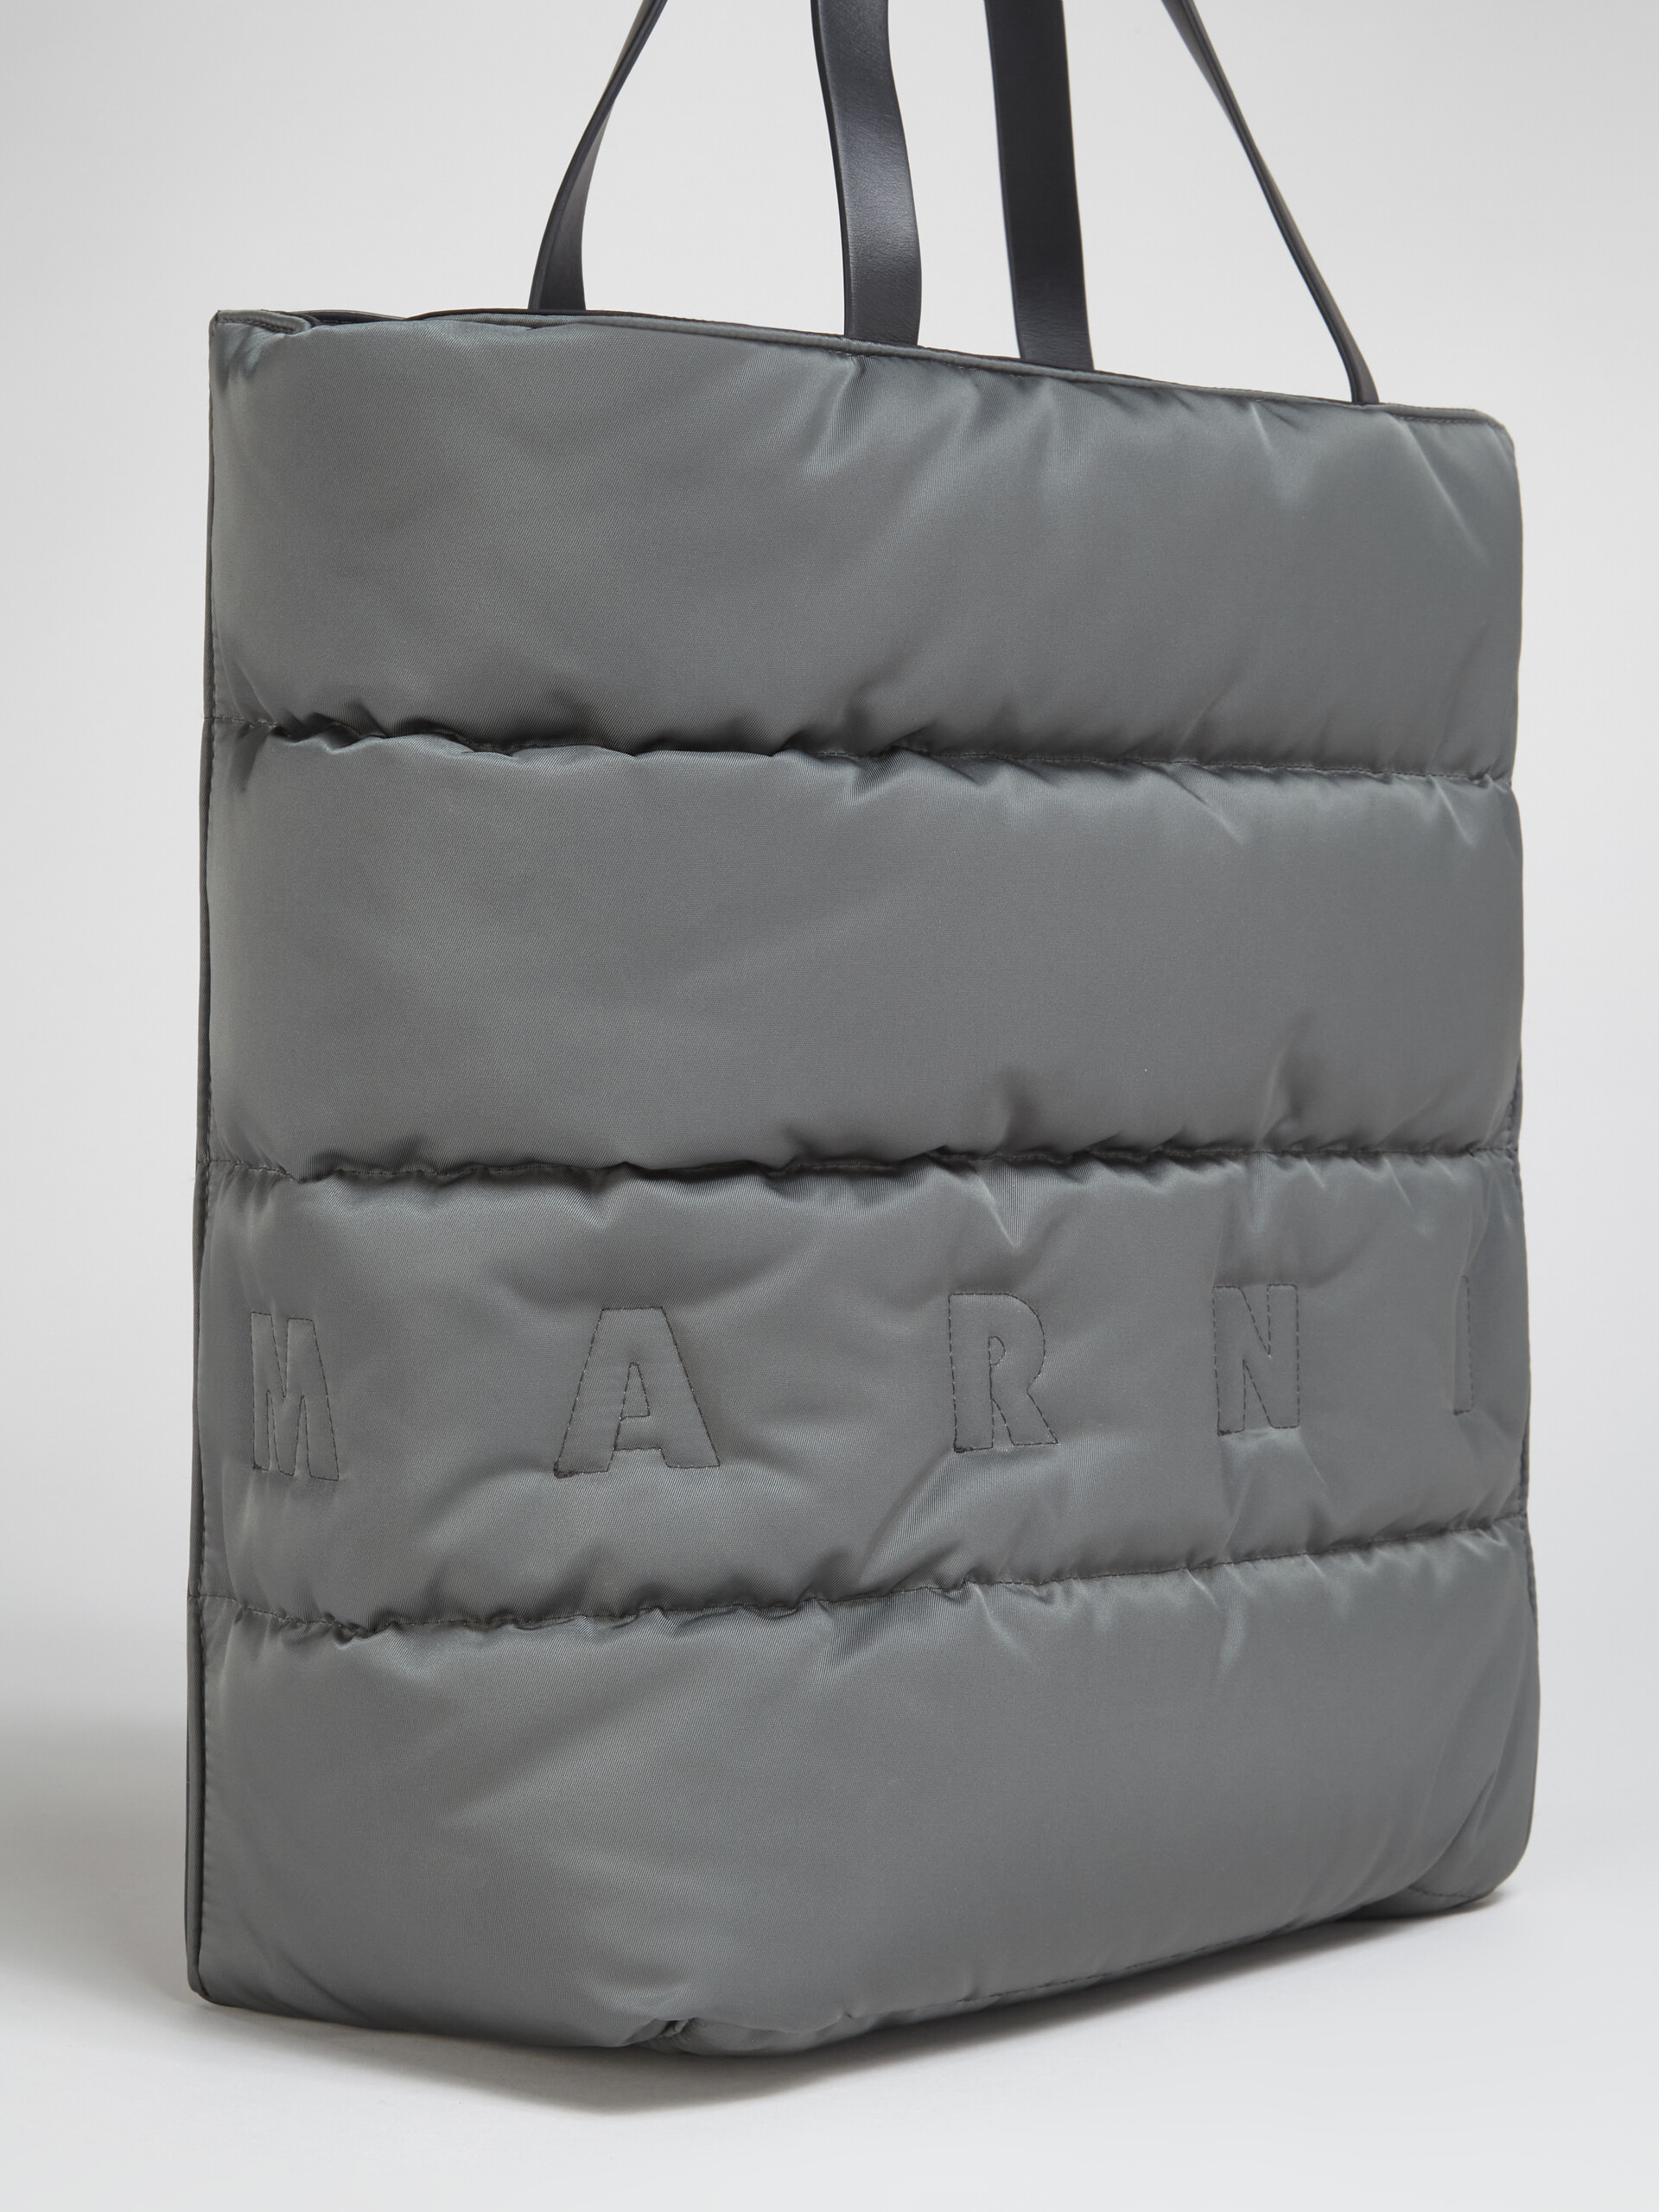 MUSEO large bag in grey nylon - Shopping Bags - Image 4